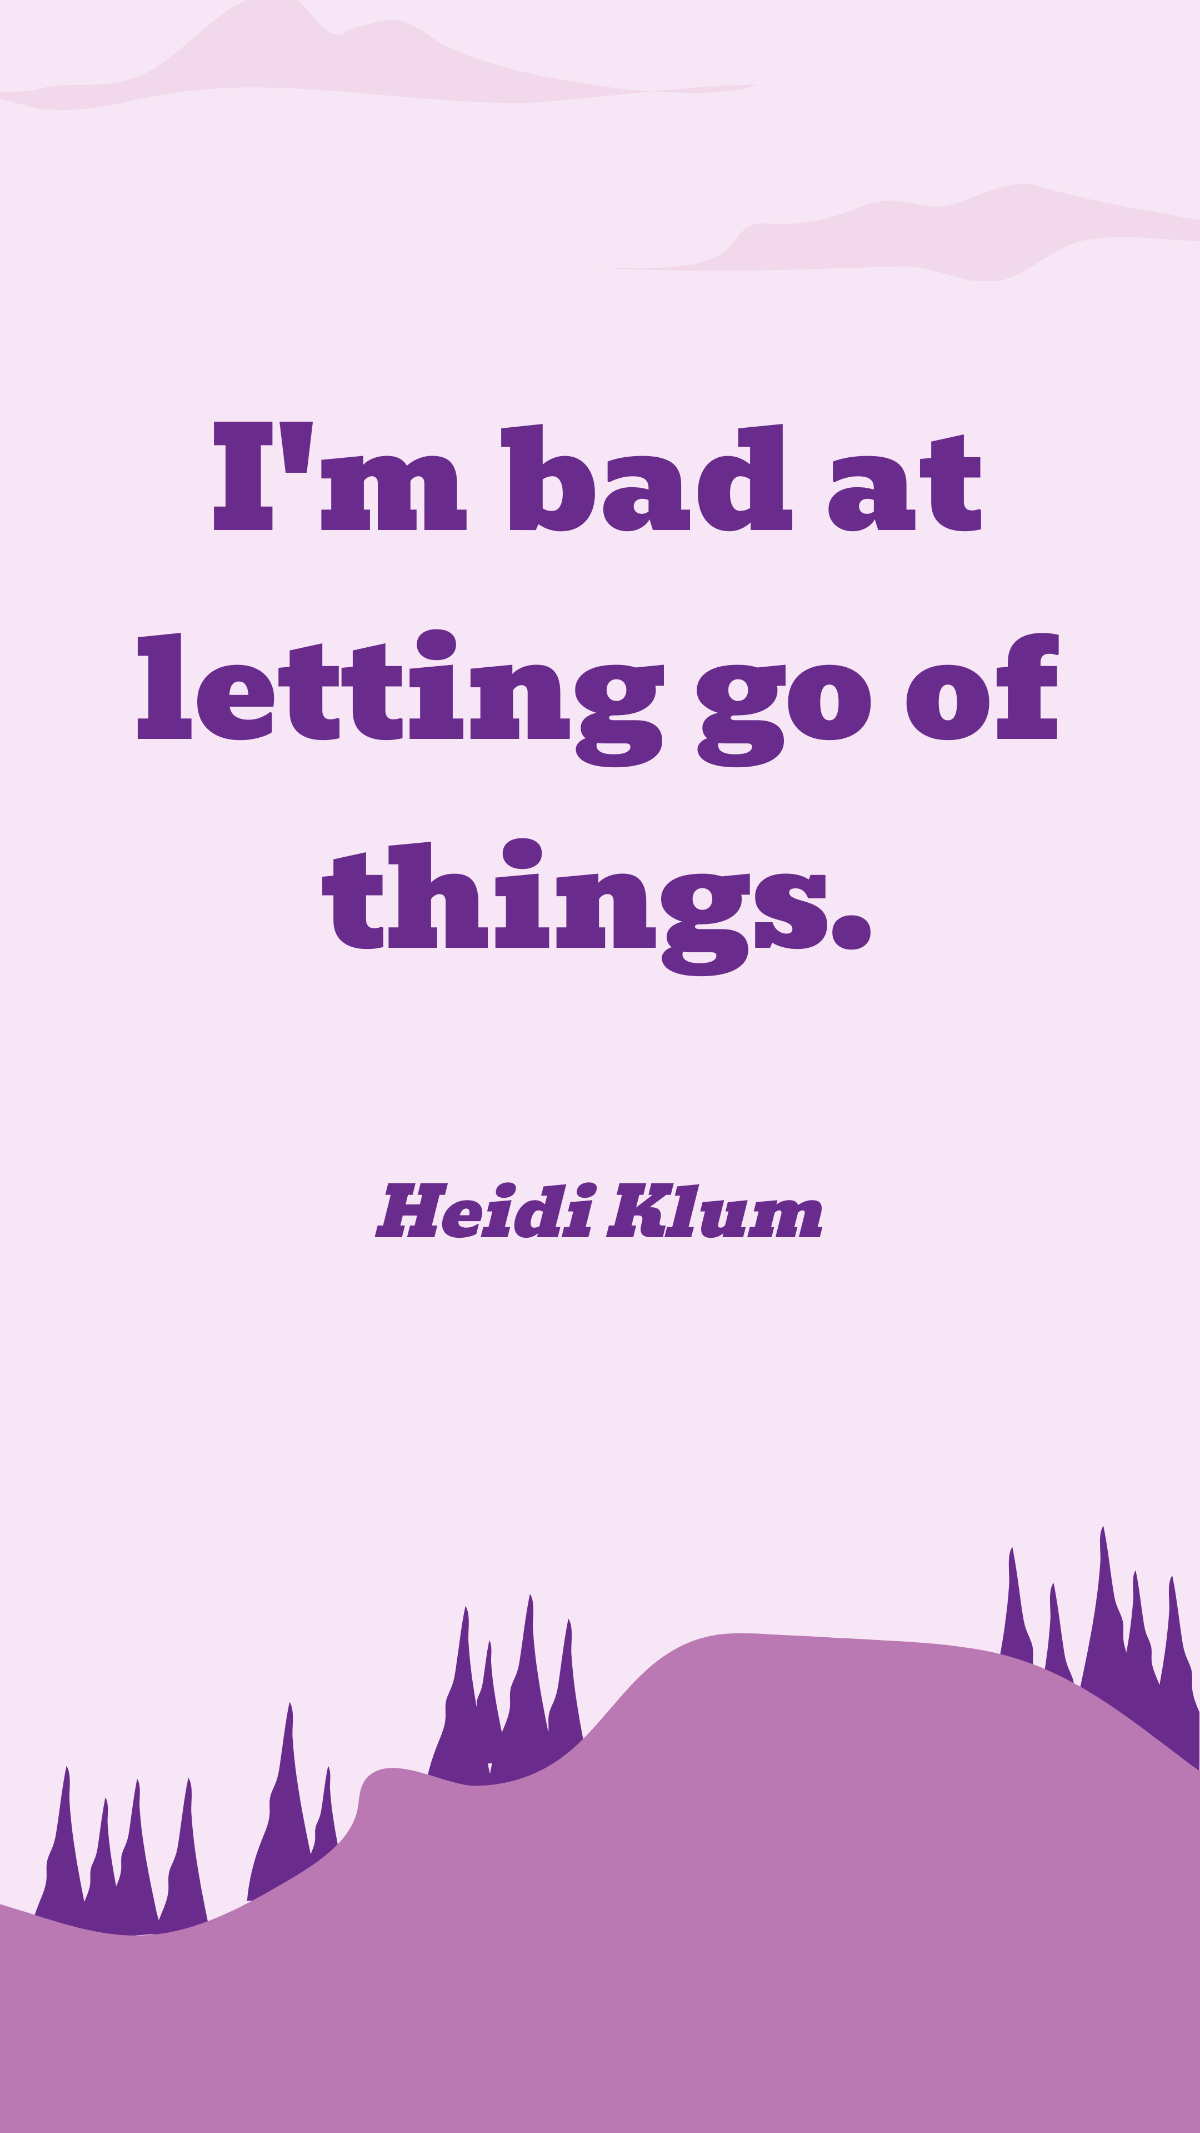 Heidi Klum - I'm bad at letting go of things. Template